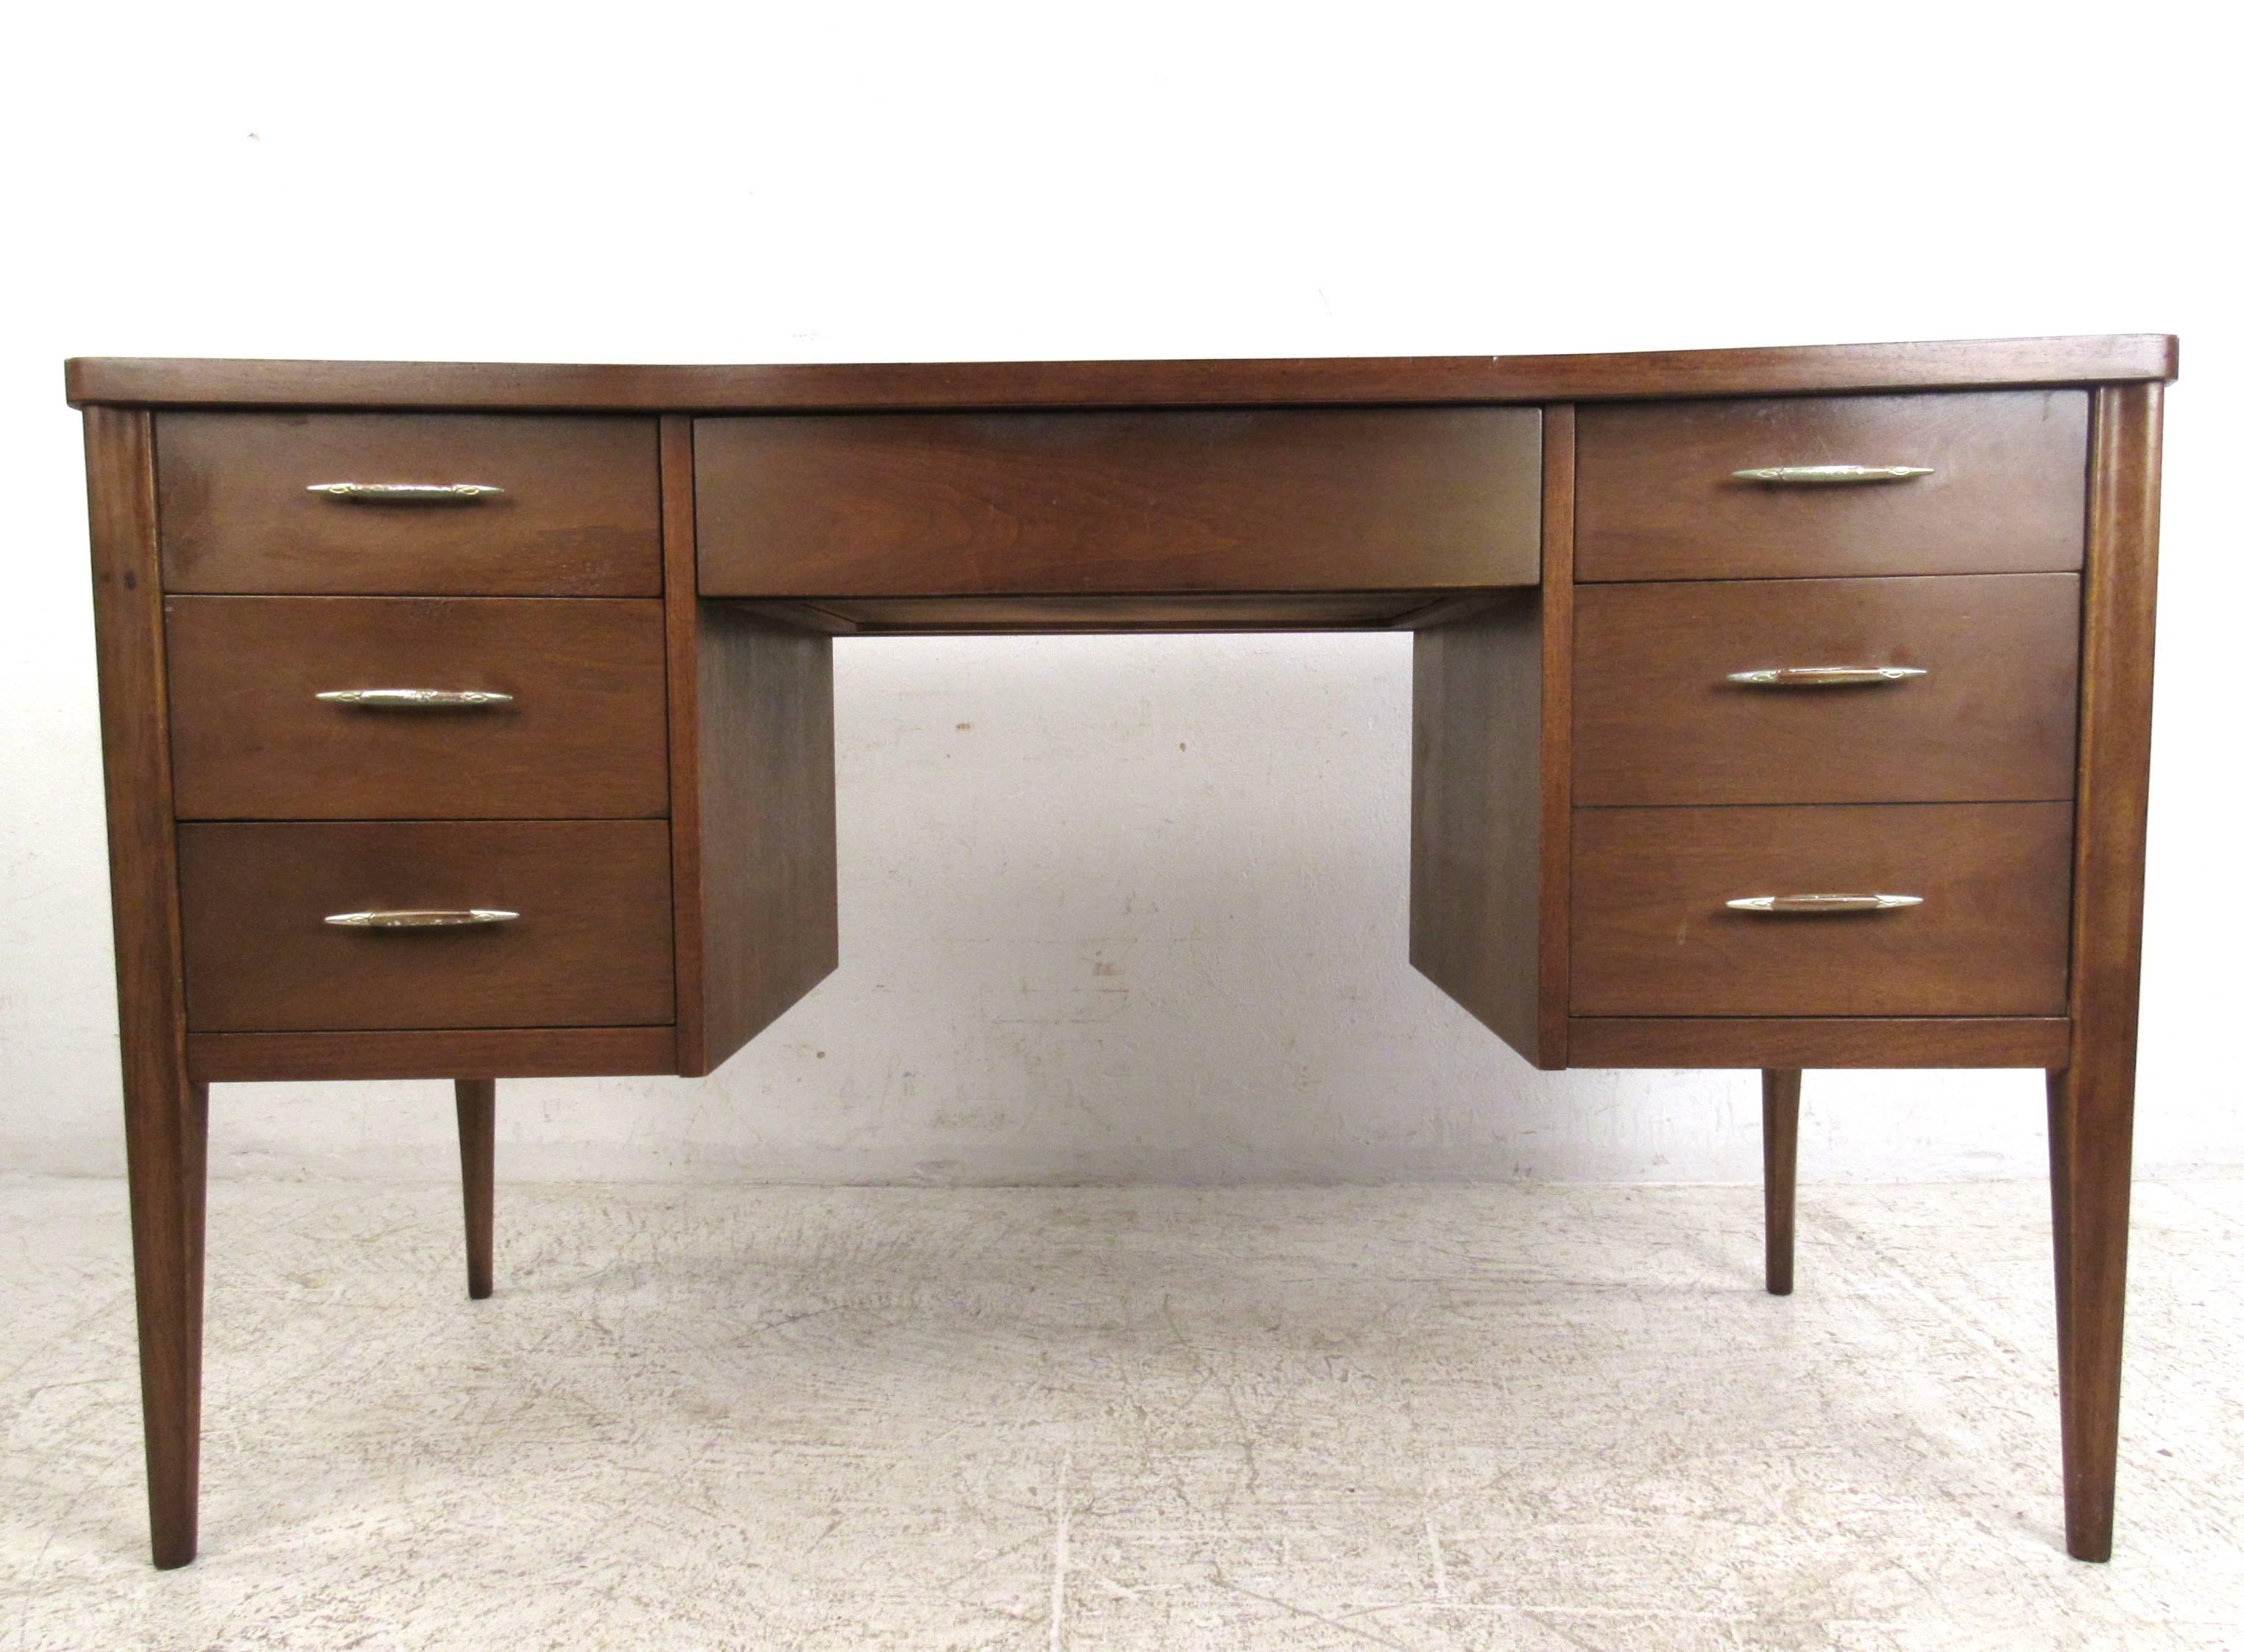 This mid-century walnut dresser features a unique sculpted front design with sturdy walnut legs. Spacious workspace with plenty of drawer space for organization and storage. Unique drawer pulls add to the vintage charm of the piece, please confirm